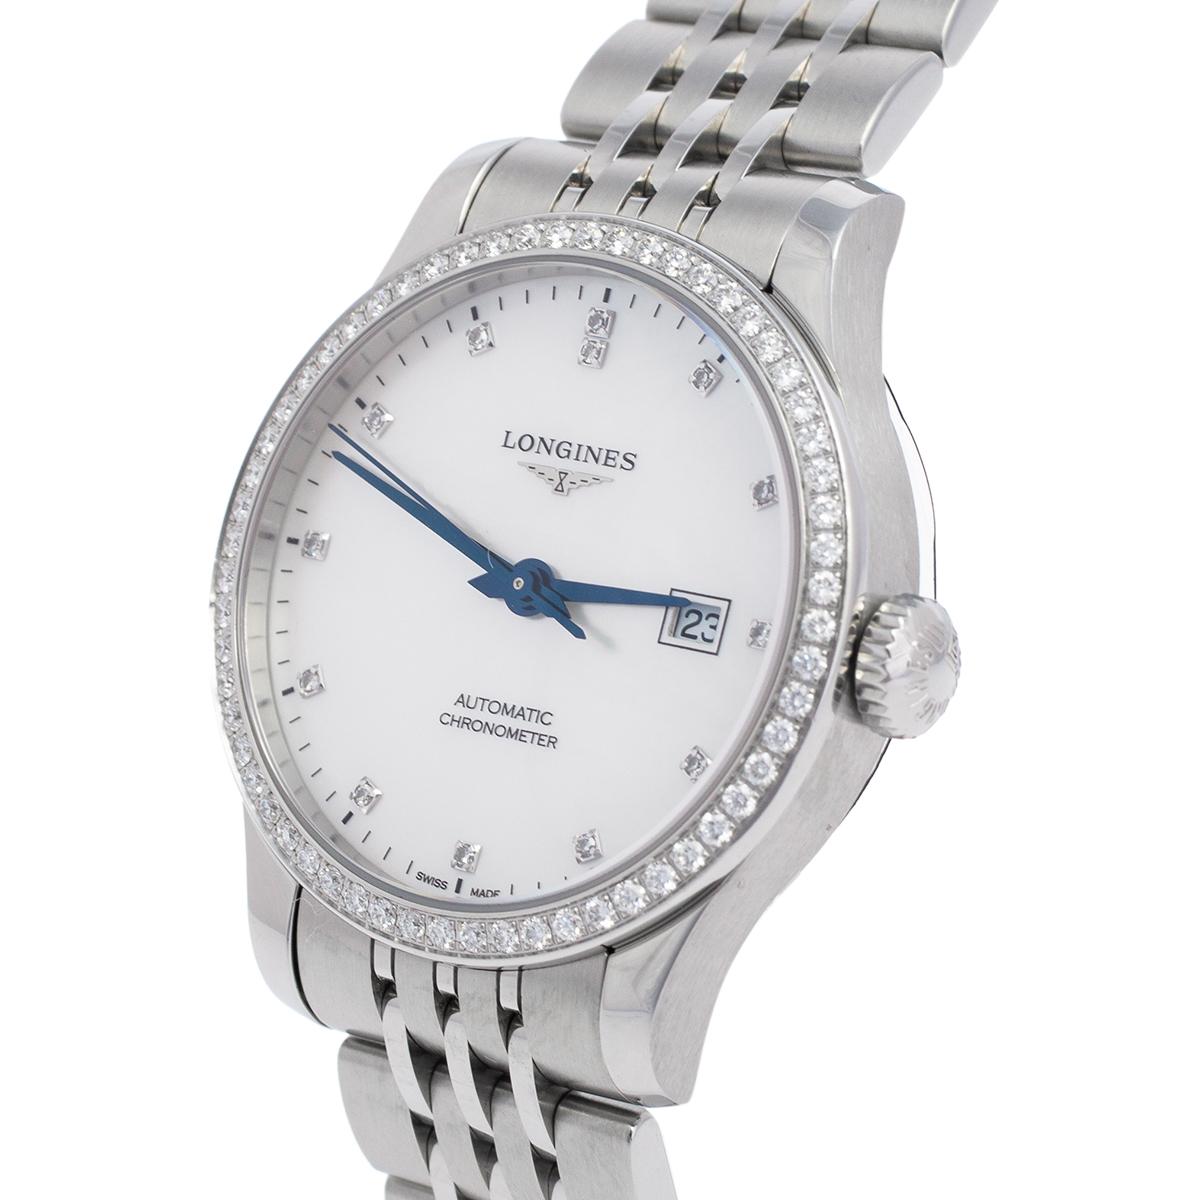 This wristwatch from Longines is elegance represented in a subtle fashion. Created from stainless steel, this watch flaunts a round case. It follows the automatic movement and has a Mother of Pearl dial set with diamond hour markers and a date